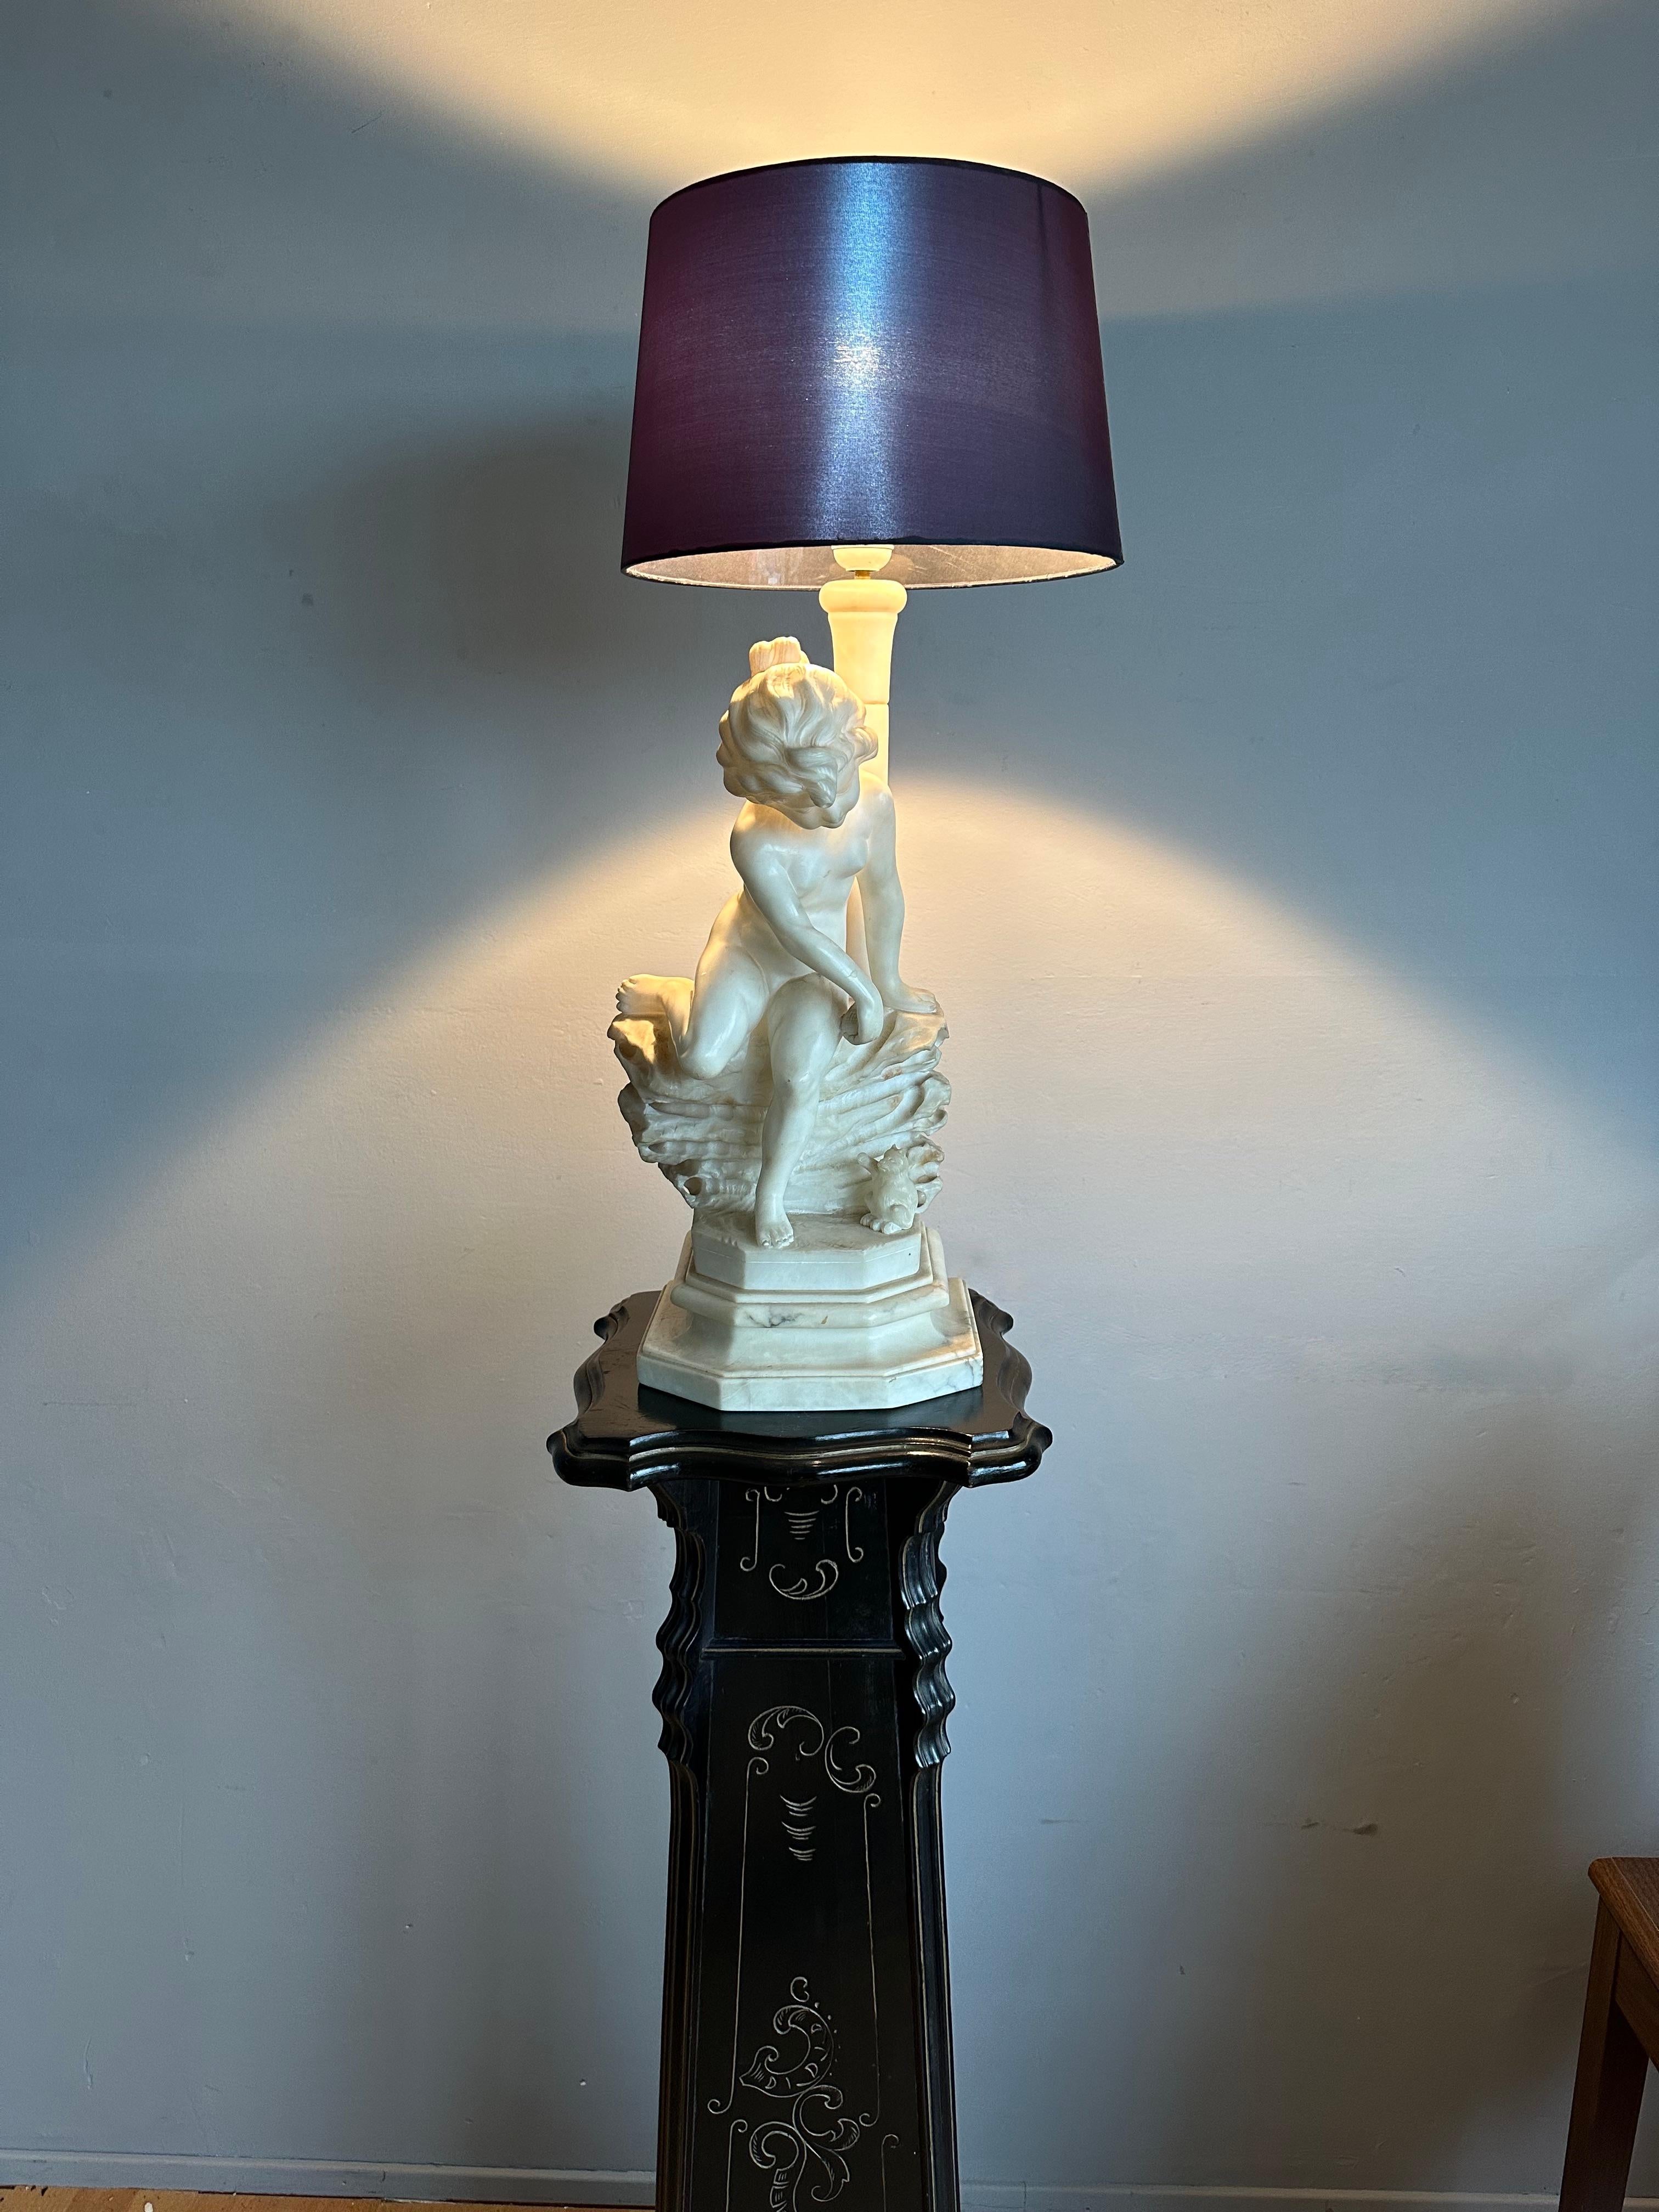 Handcarved, endearing and remarkable work of art.

If you are a collector of rare and good quality antiques then this wonderful alabaster sculpture table lamp could be perfect for your collection. Even if you don't necessary like antiques then you